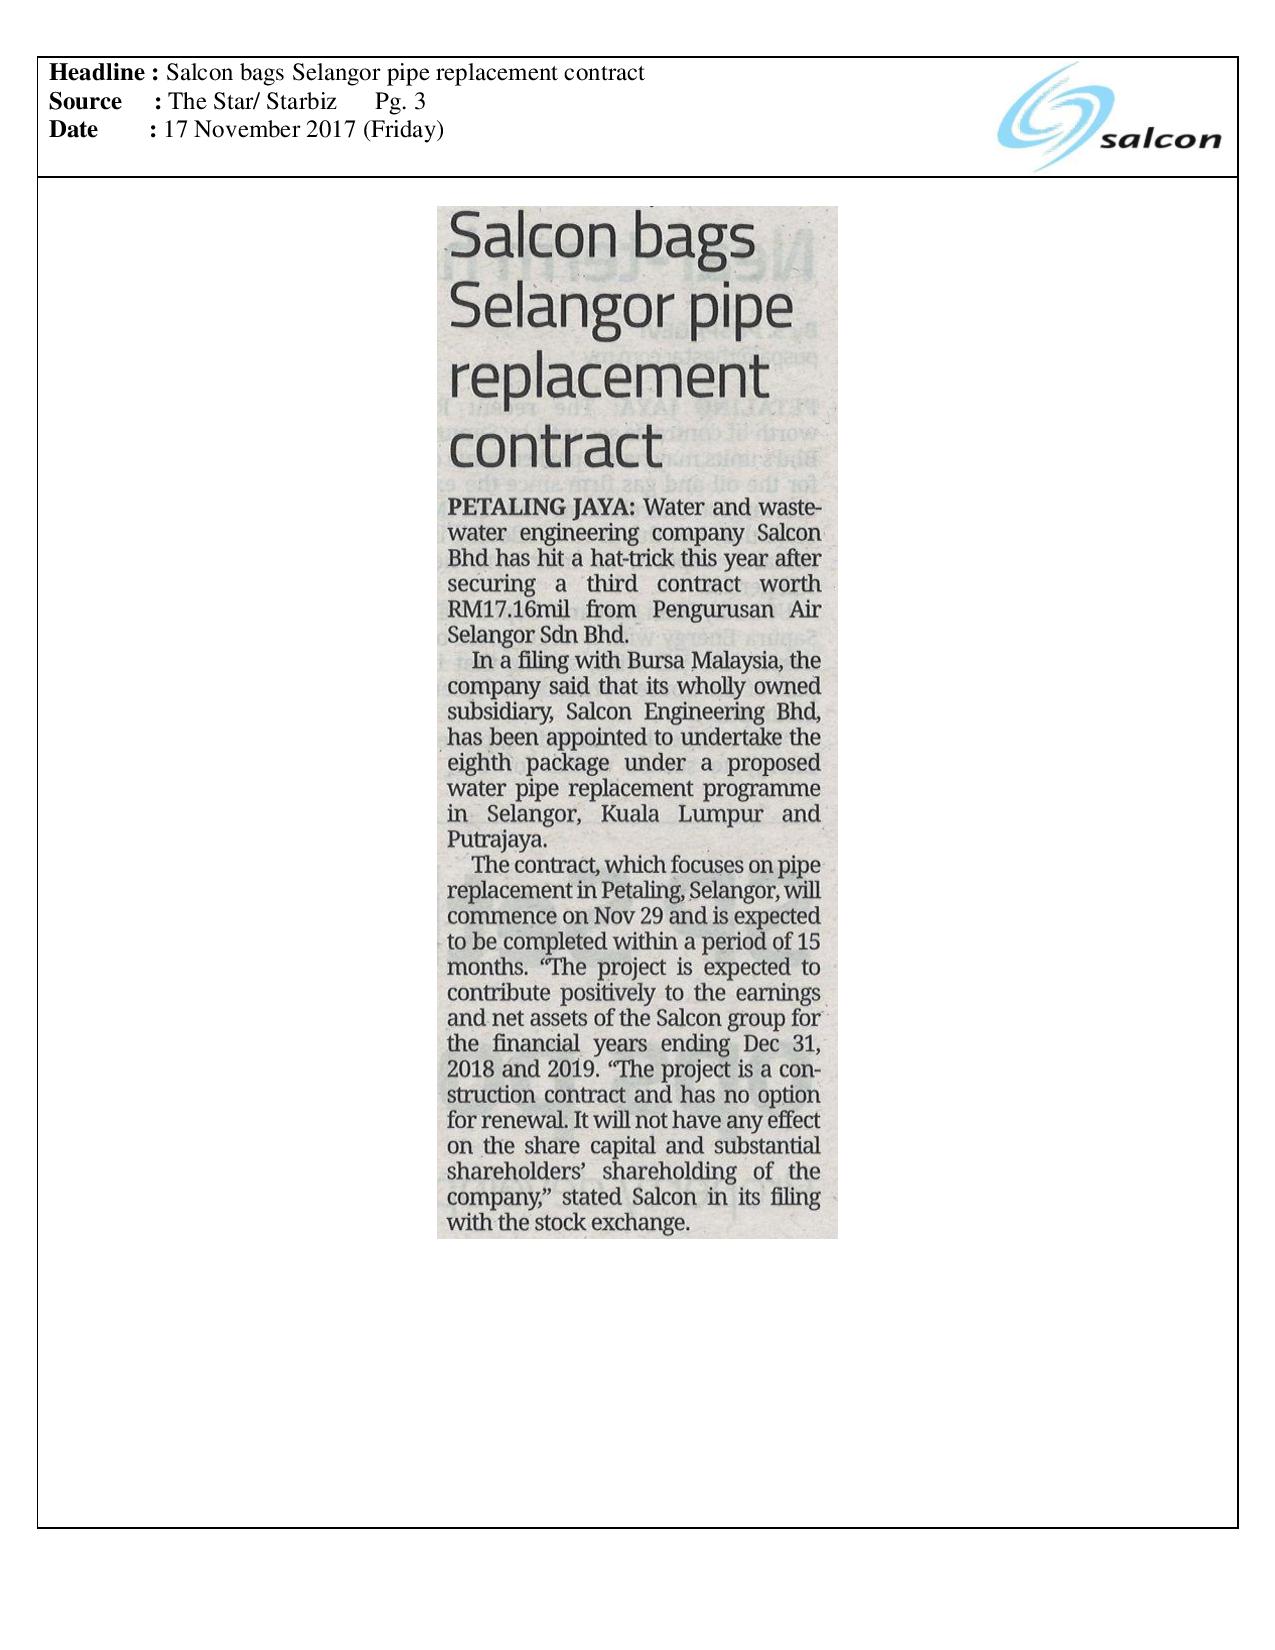 Salcon bags Selangor pipe replacement contract